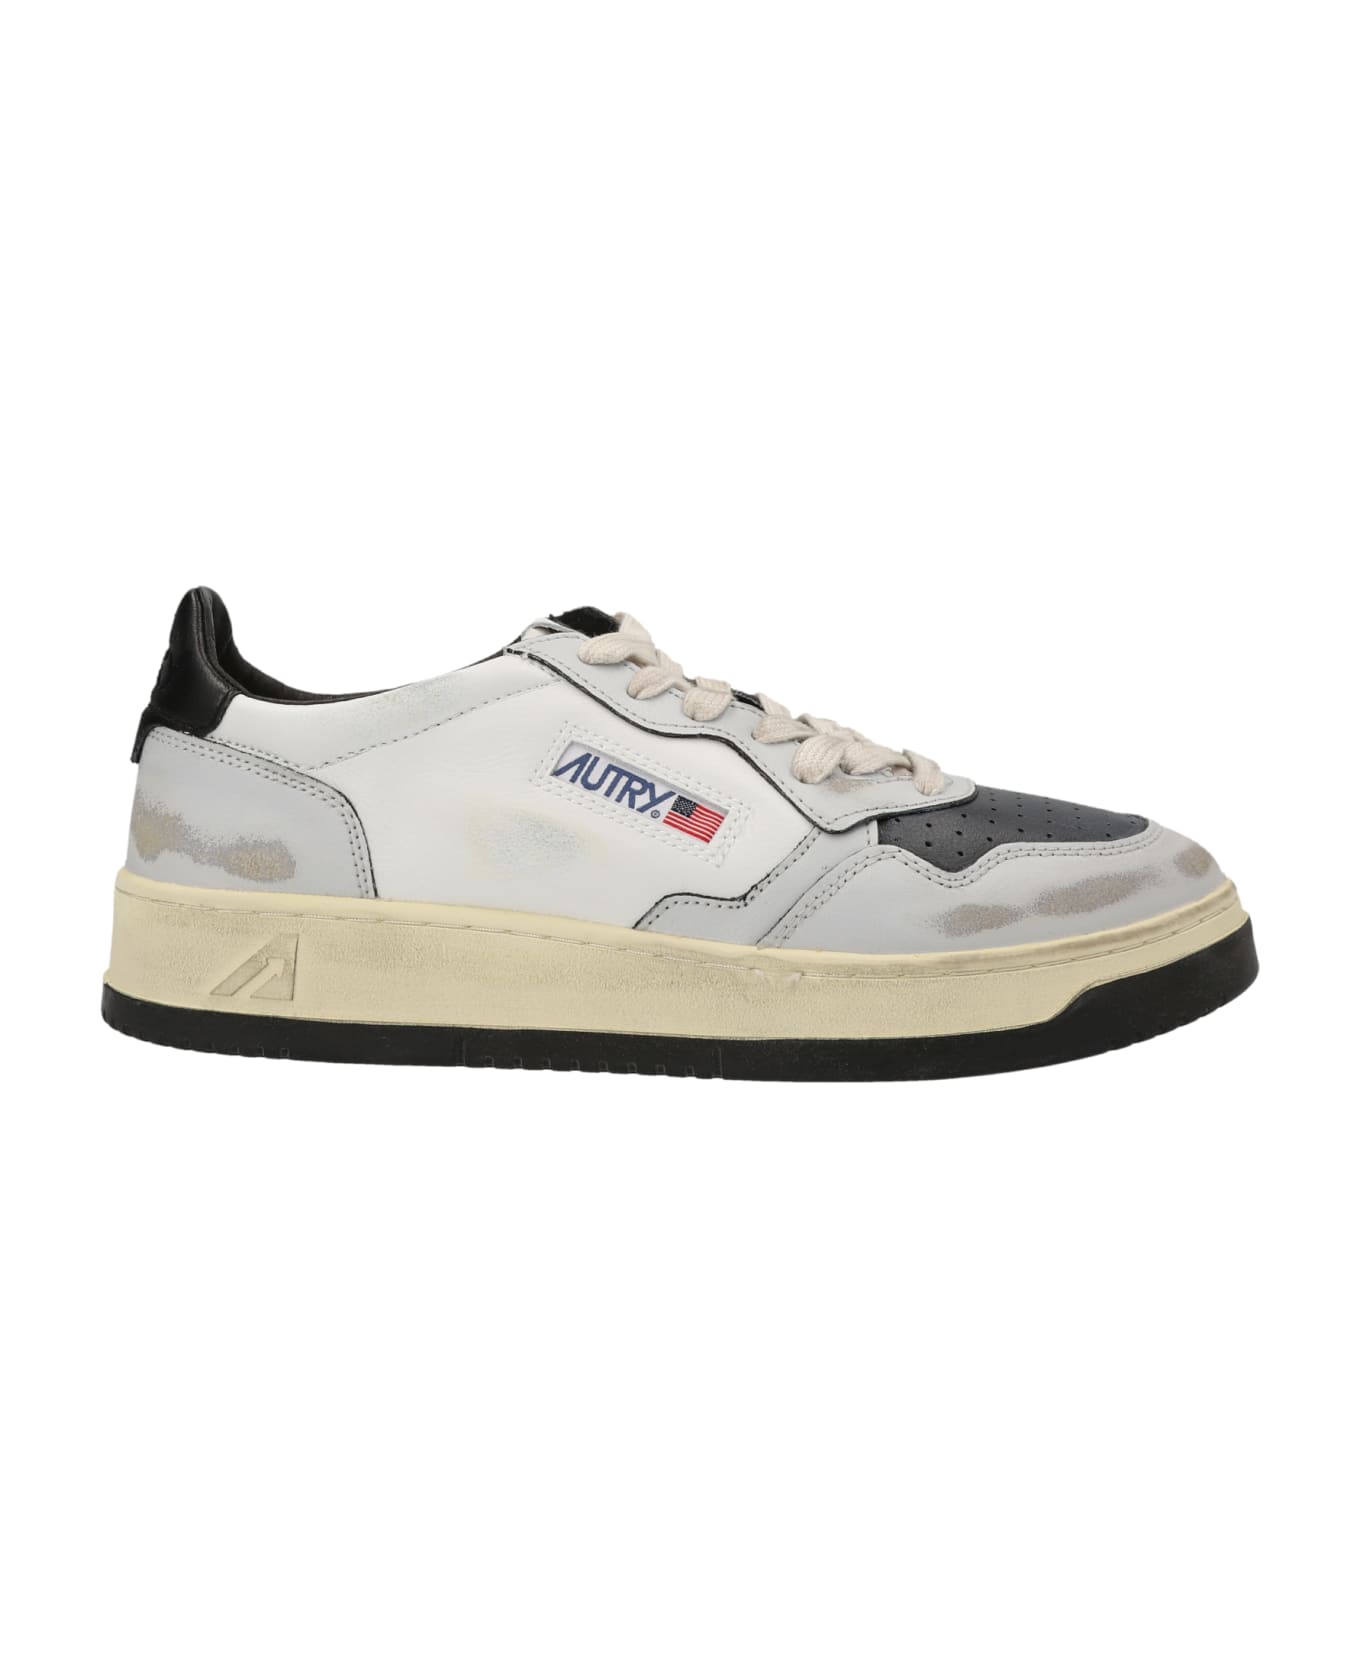 Autry Sup Vint Sneakers In White Leather - white